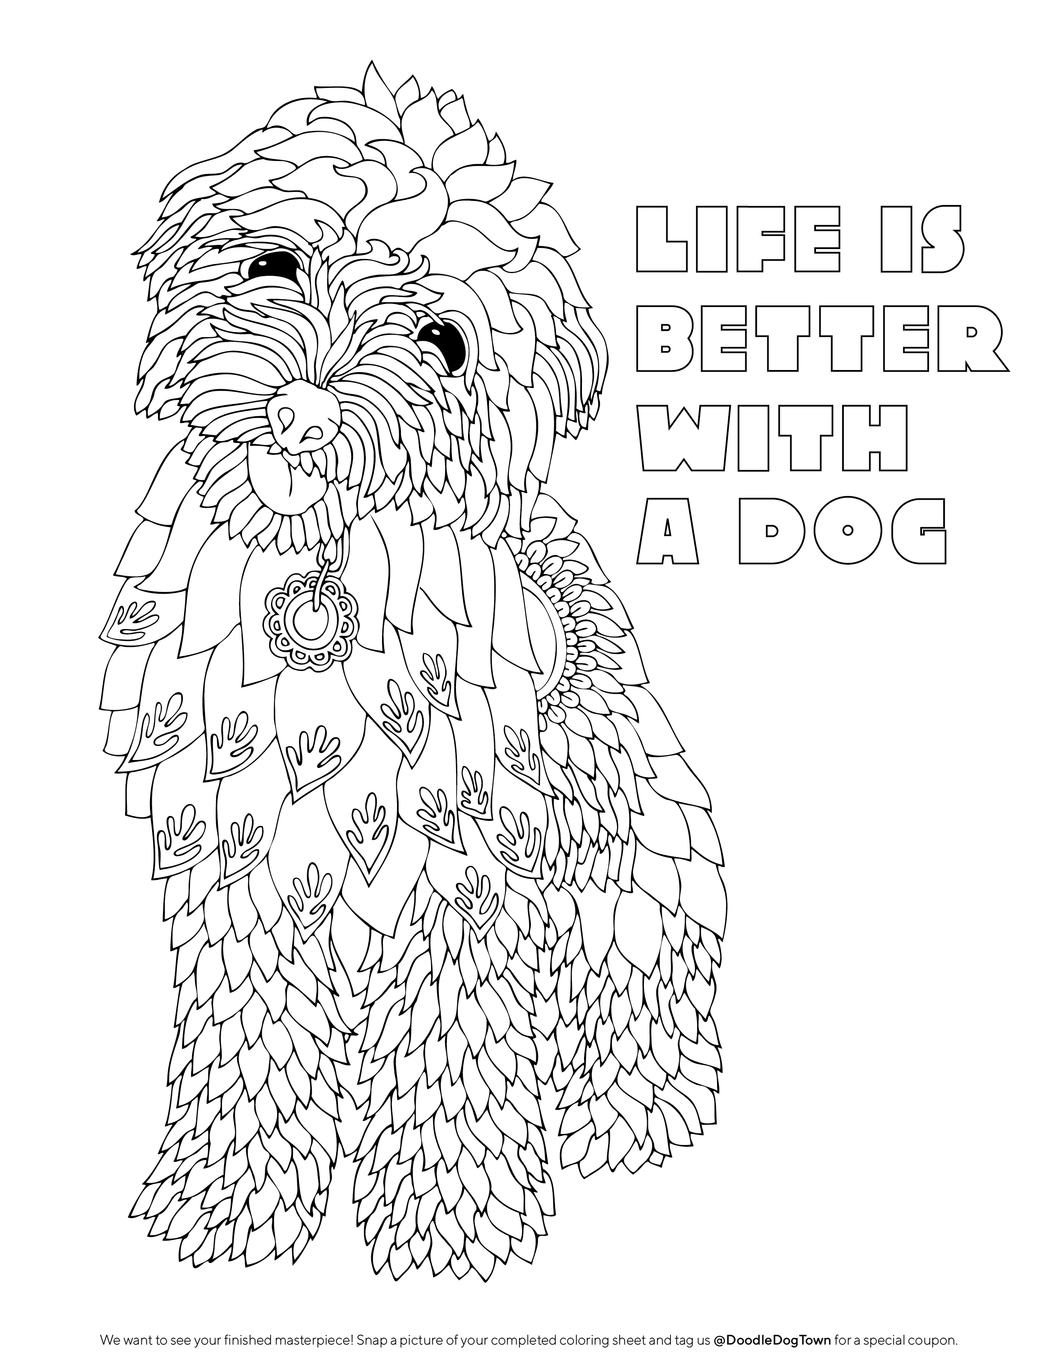 Life is Better with a Dog Coloring Sheet